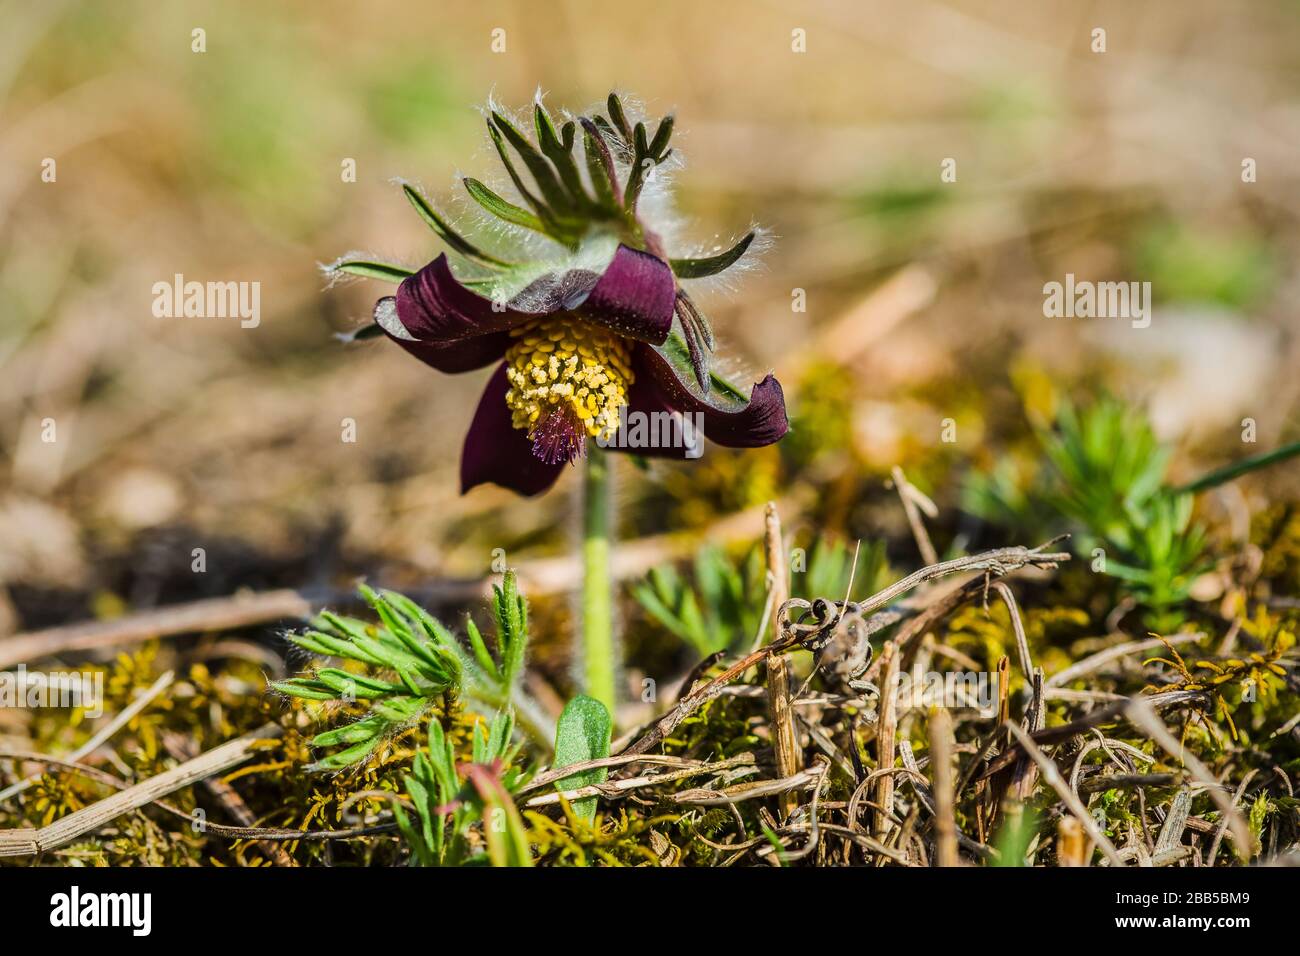 Blooming dark purple flower with yellow pistils of meadow anemone, pasque flower, with hairy stalk growing in meadow on a spring sunny day. Stock Photo